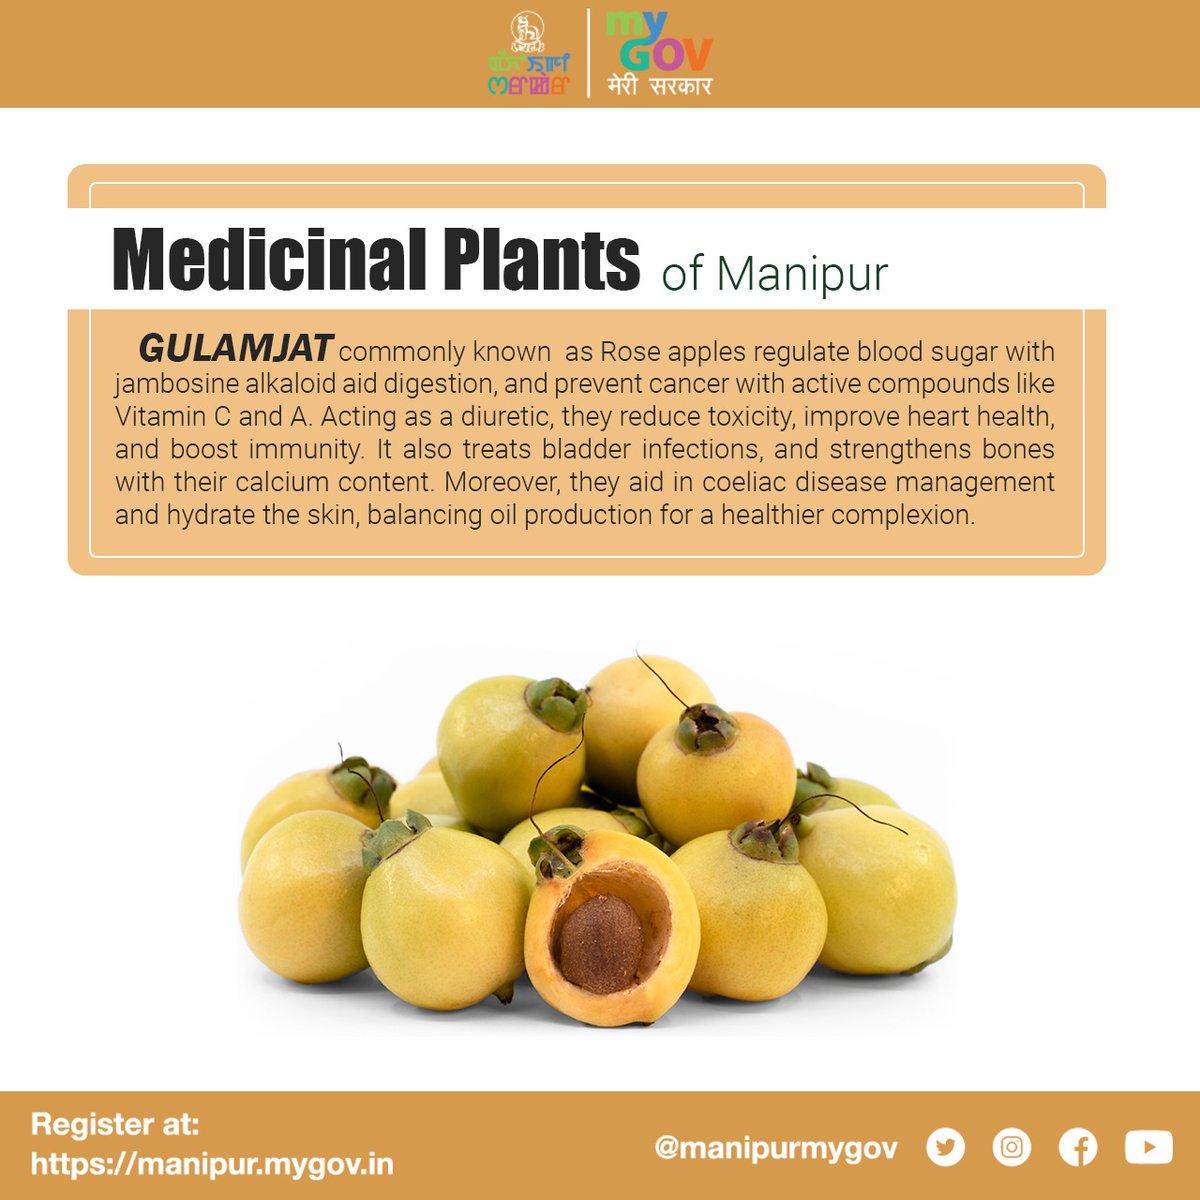 Known for its distinct fragrance which has a close semblance to the scent of a rose, Gulamjat gives the sweet favour of a guava when eaten. This medicinal plant is not widely known among the young generations & there is a need for its conservation.